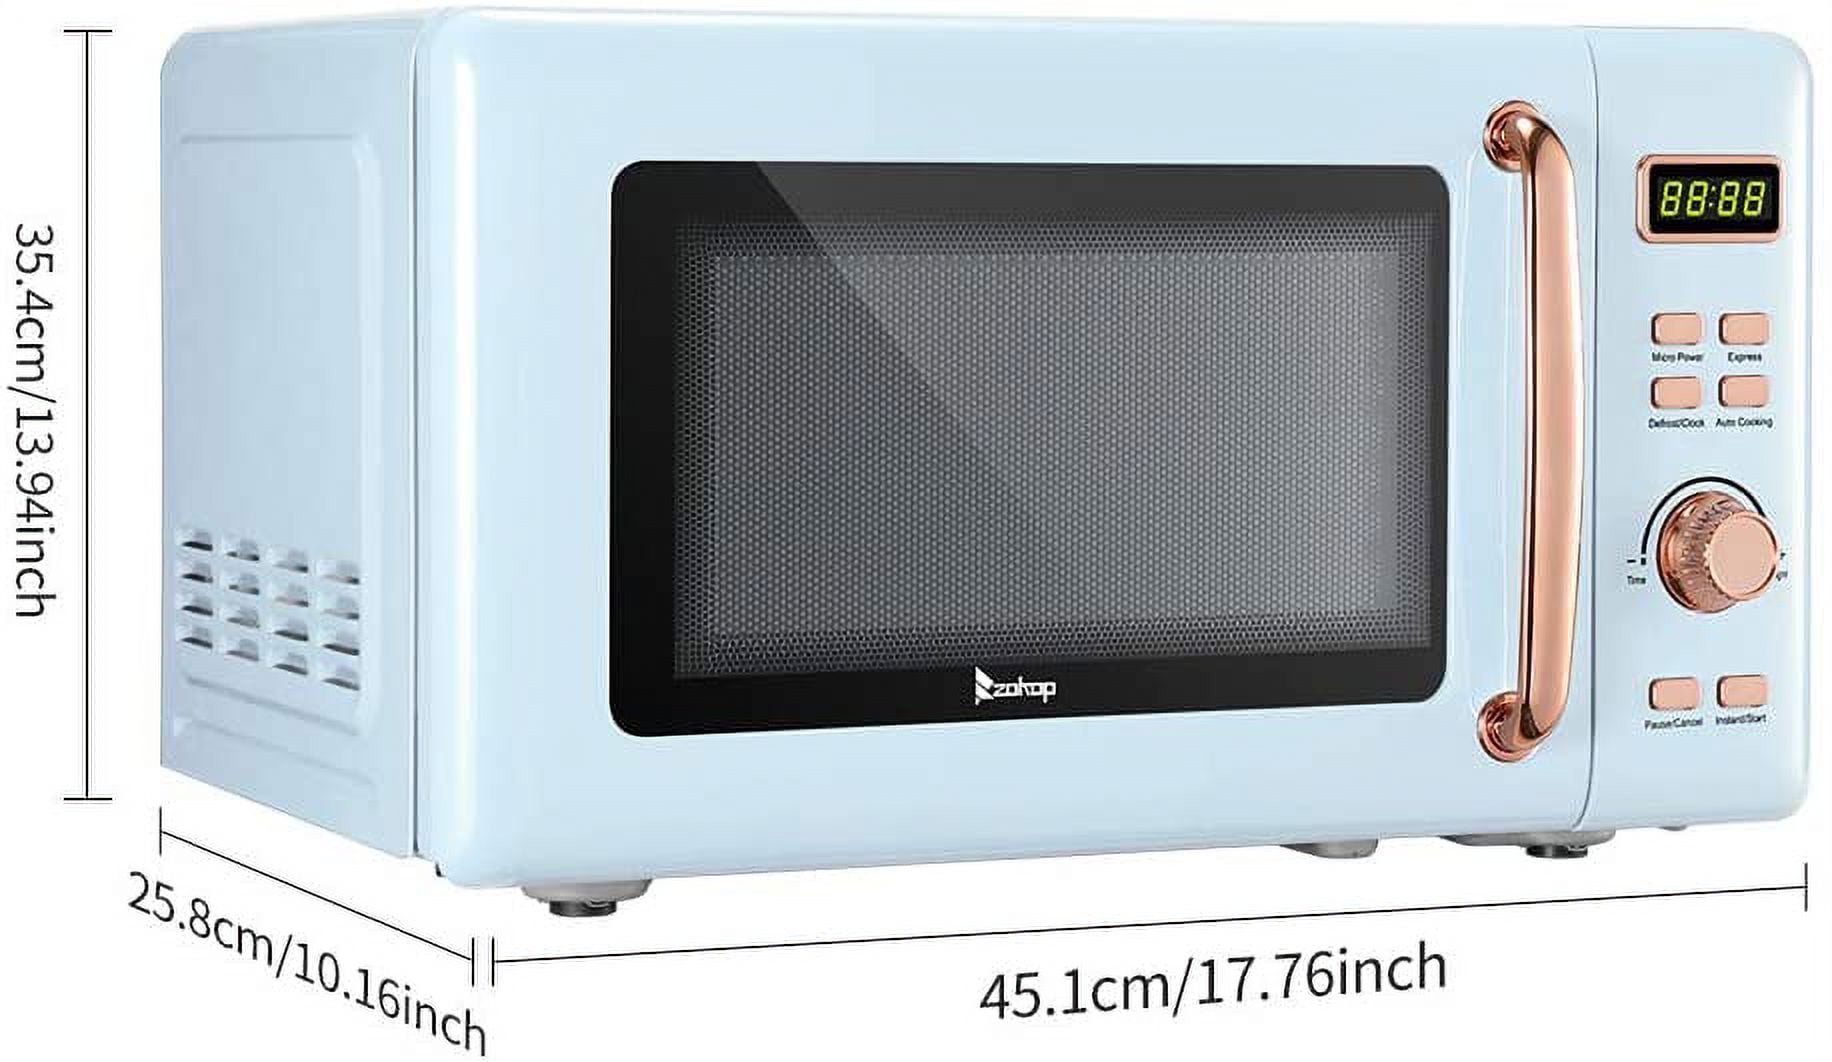  SMETA Small Compact Microwave Oven Countertop 0.7 Cu.Ft/700W  for Dorm, 10 Power Levels, Child Safety Lock, Black